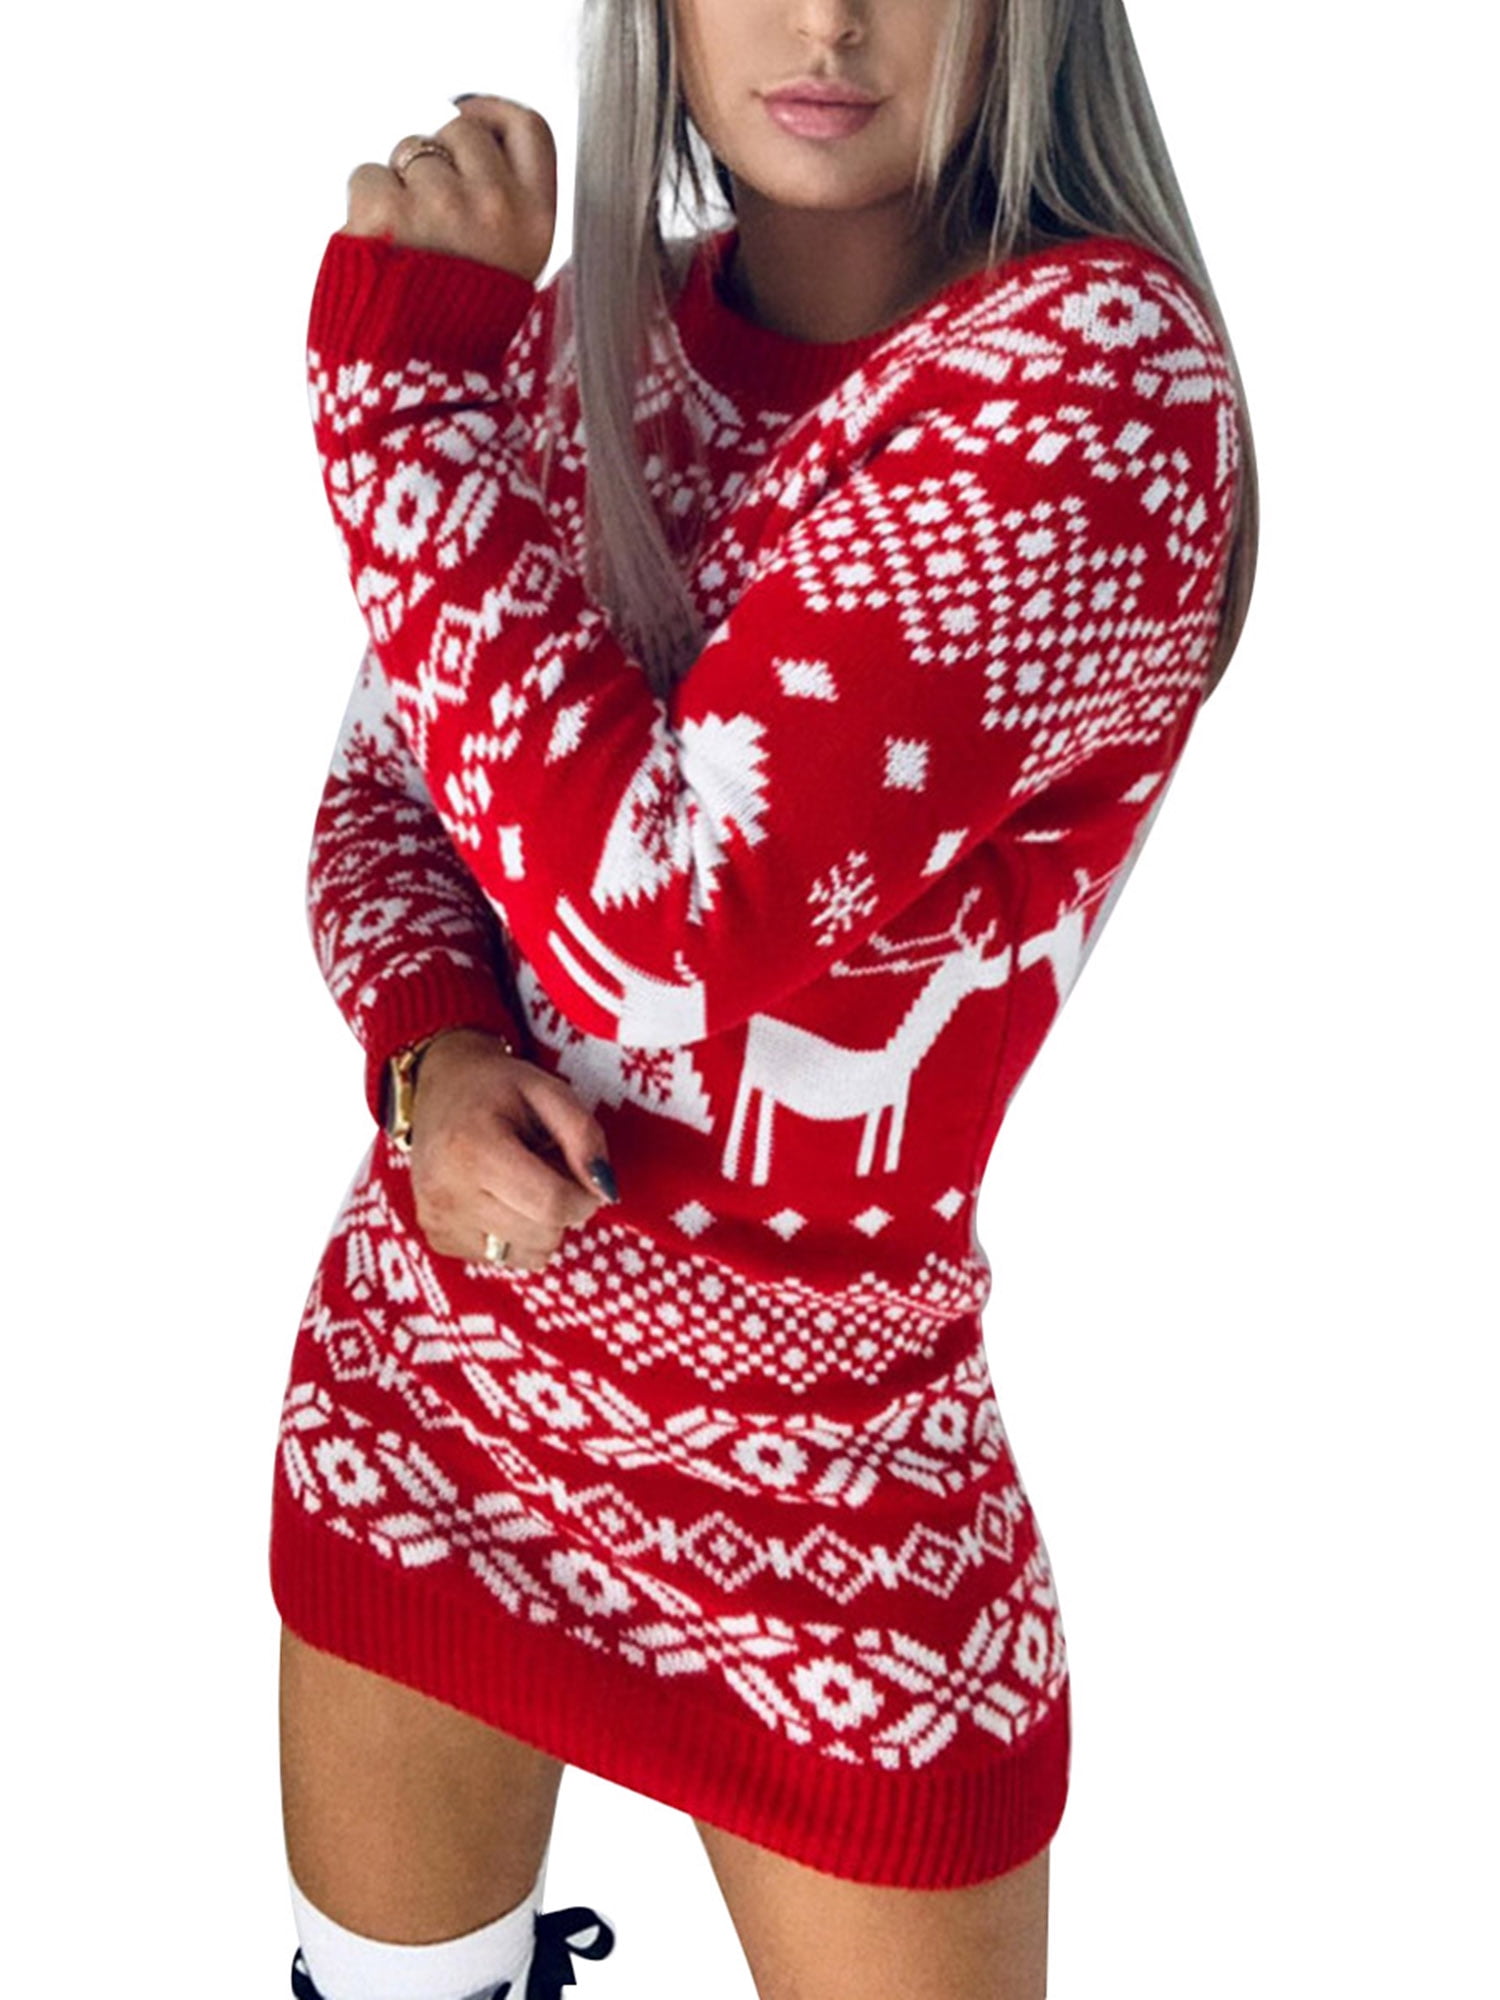 Licupiee Ugly Christmas Sweater Dress for Women Long Sleeve Crew Neck  Bodycon Party Pencil Mini Dress 